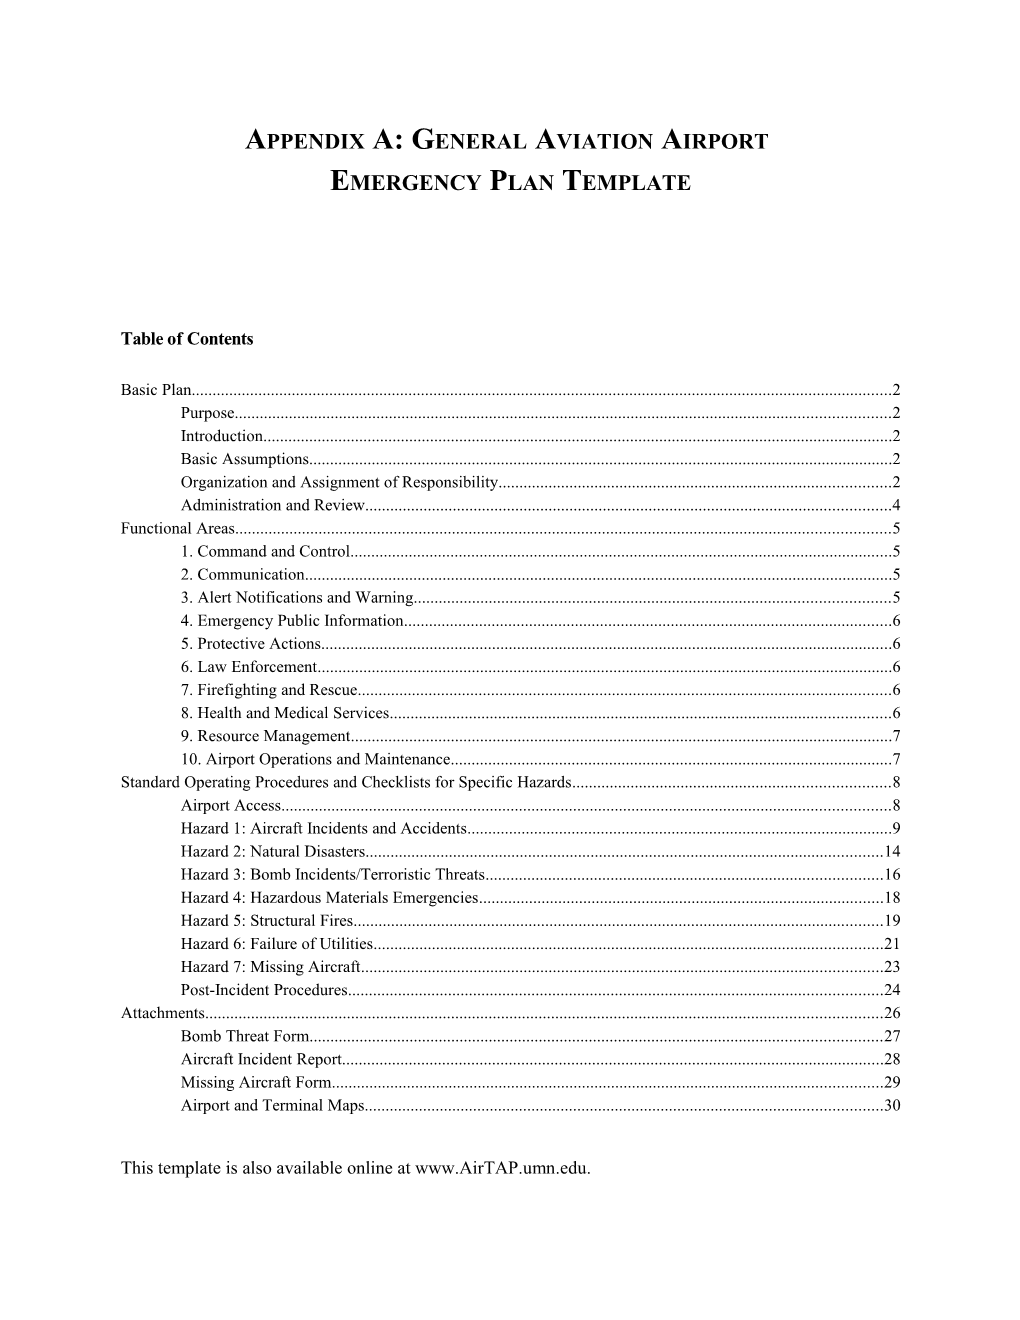 Appendix A: General Aviation Airport Emergency Plan Template